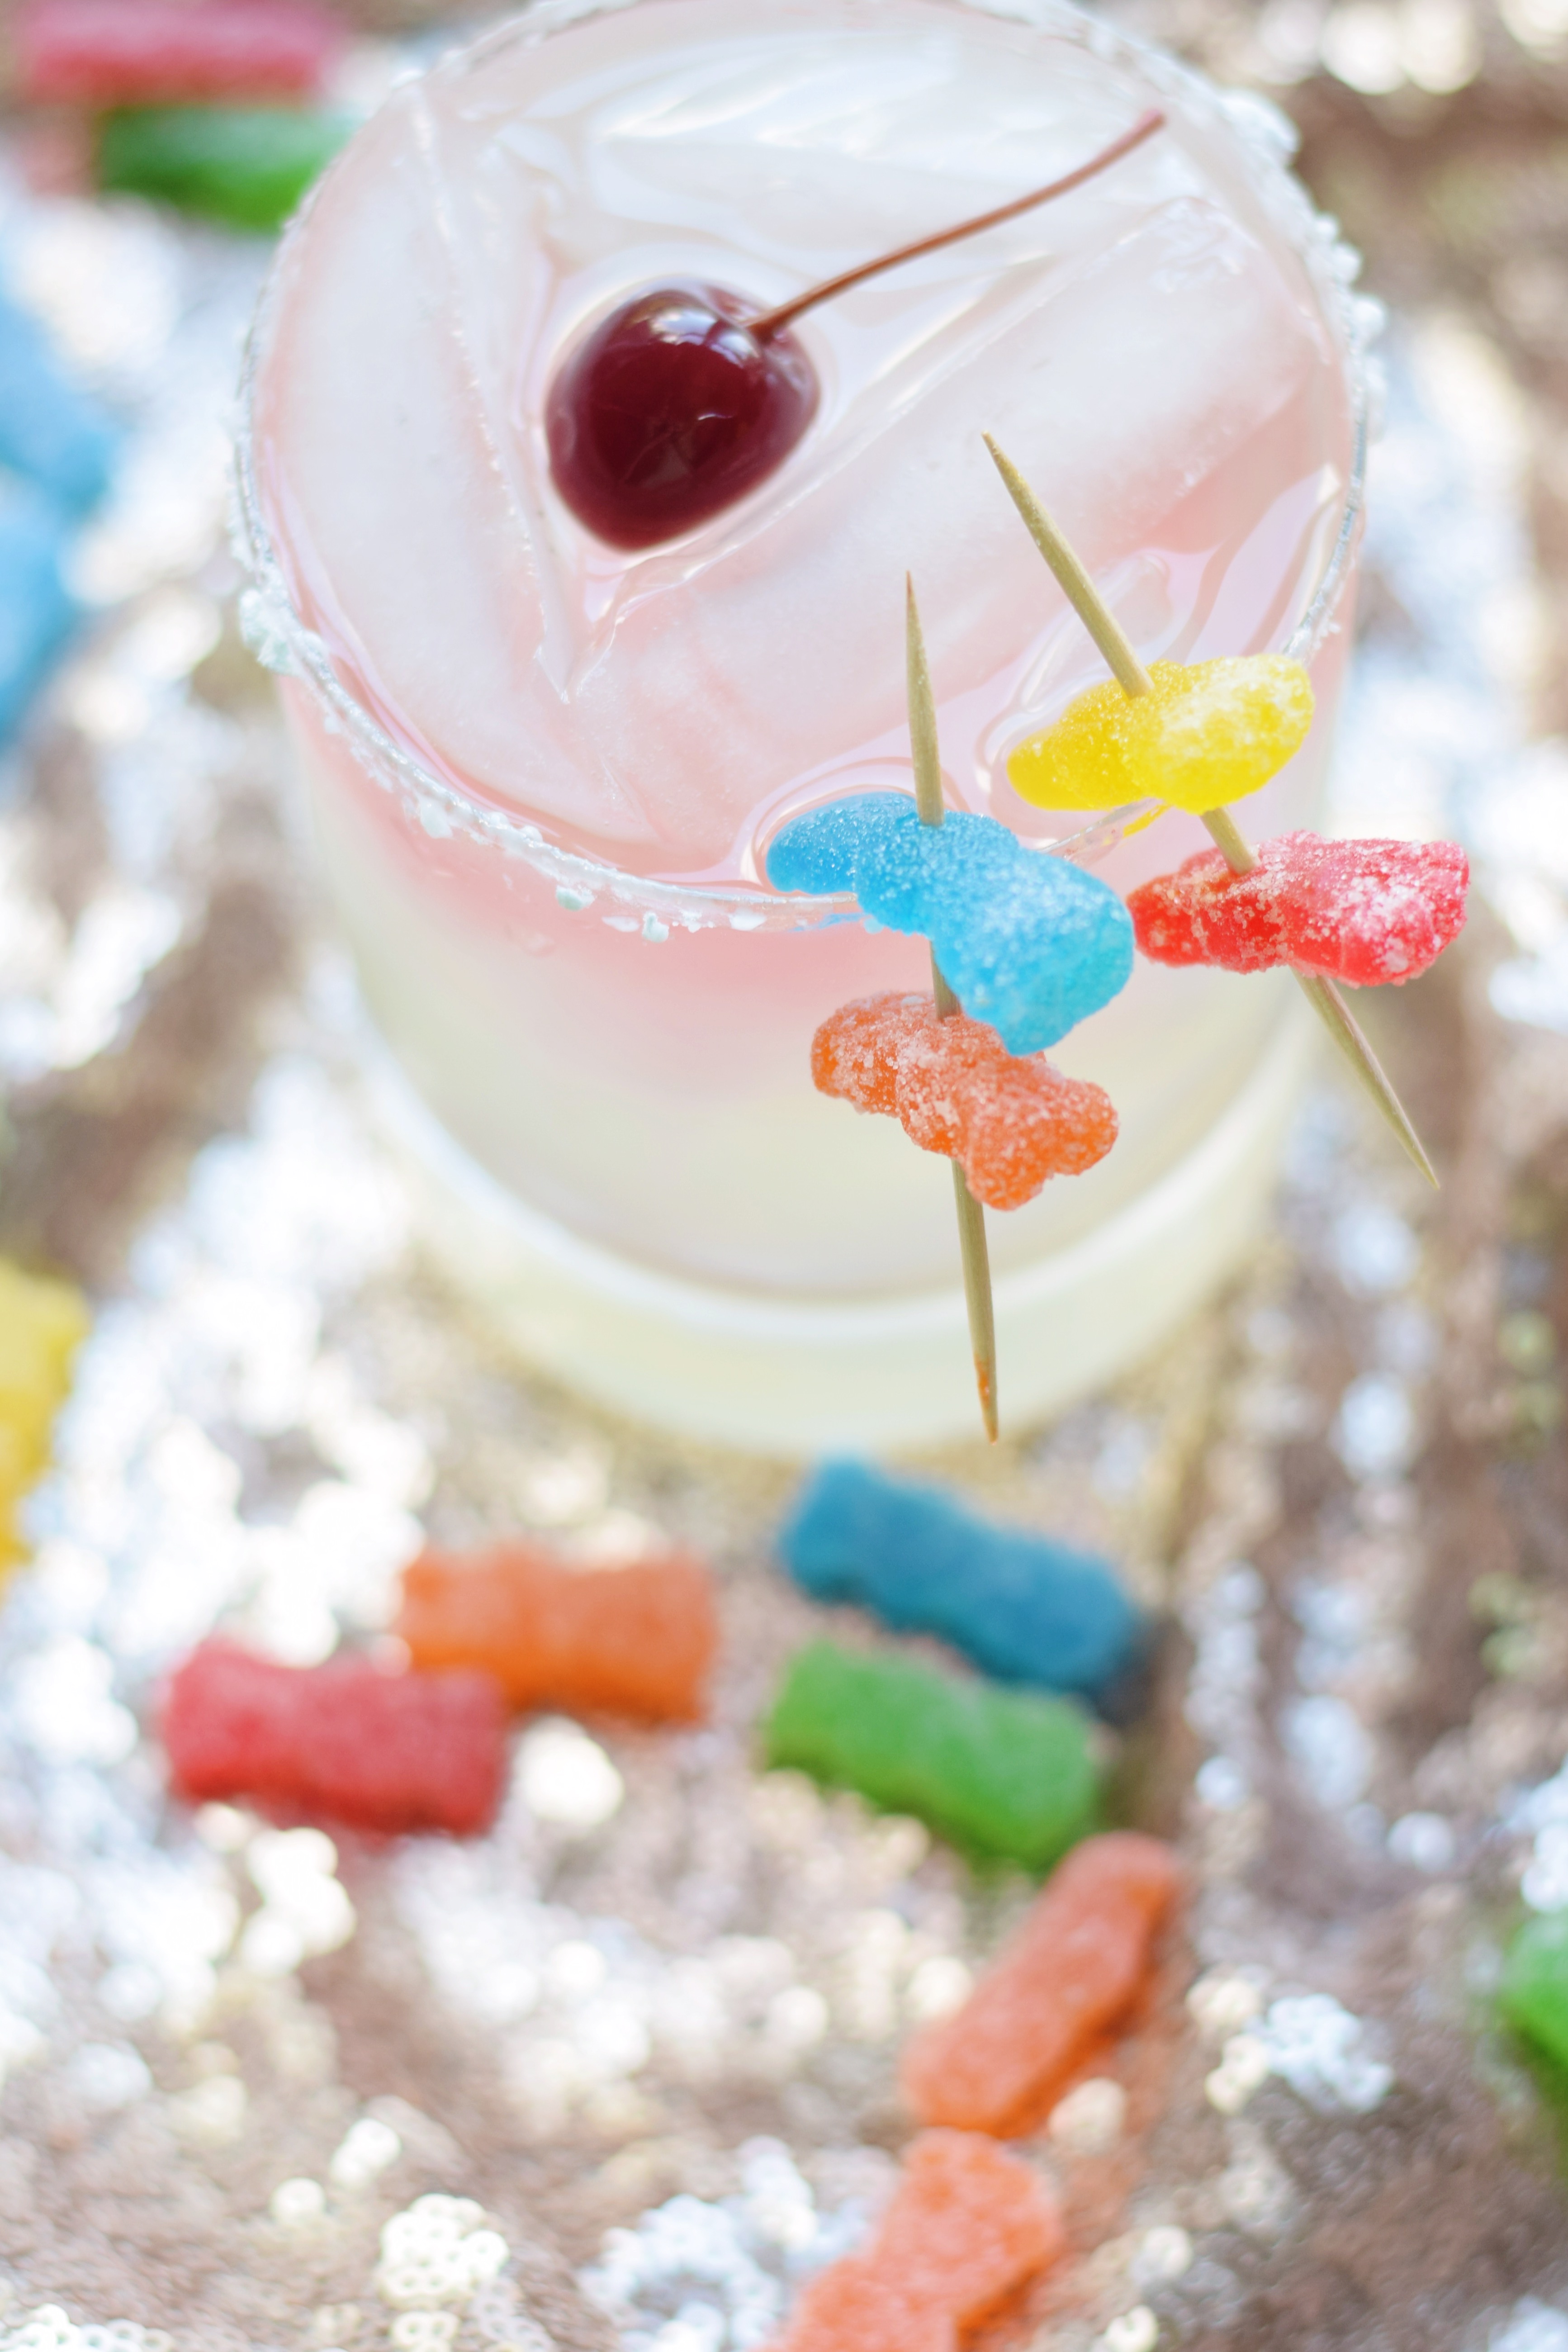 Whiskey Patch - Whiskey Sour - Sour Patch Kids - Candy Cocktail - Halloween Happy Hour - Whiskey Cocktail - Liquor - Whiskey - Happy Hour Idea for Halloween - Halloween Candy - Communikait by Kait Hanson